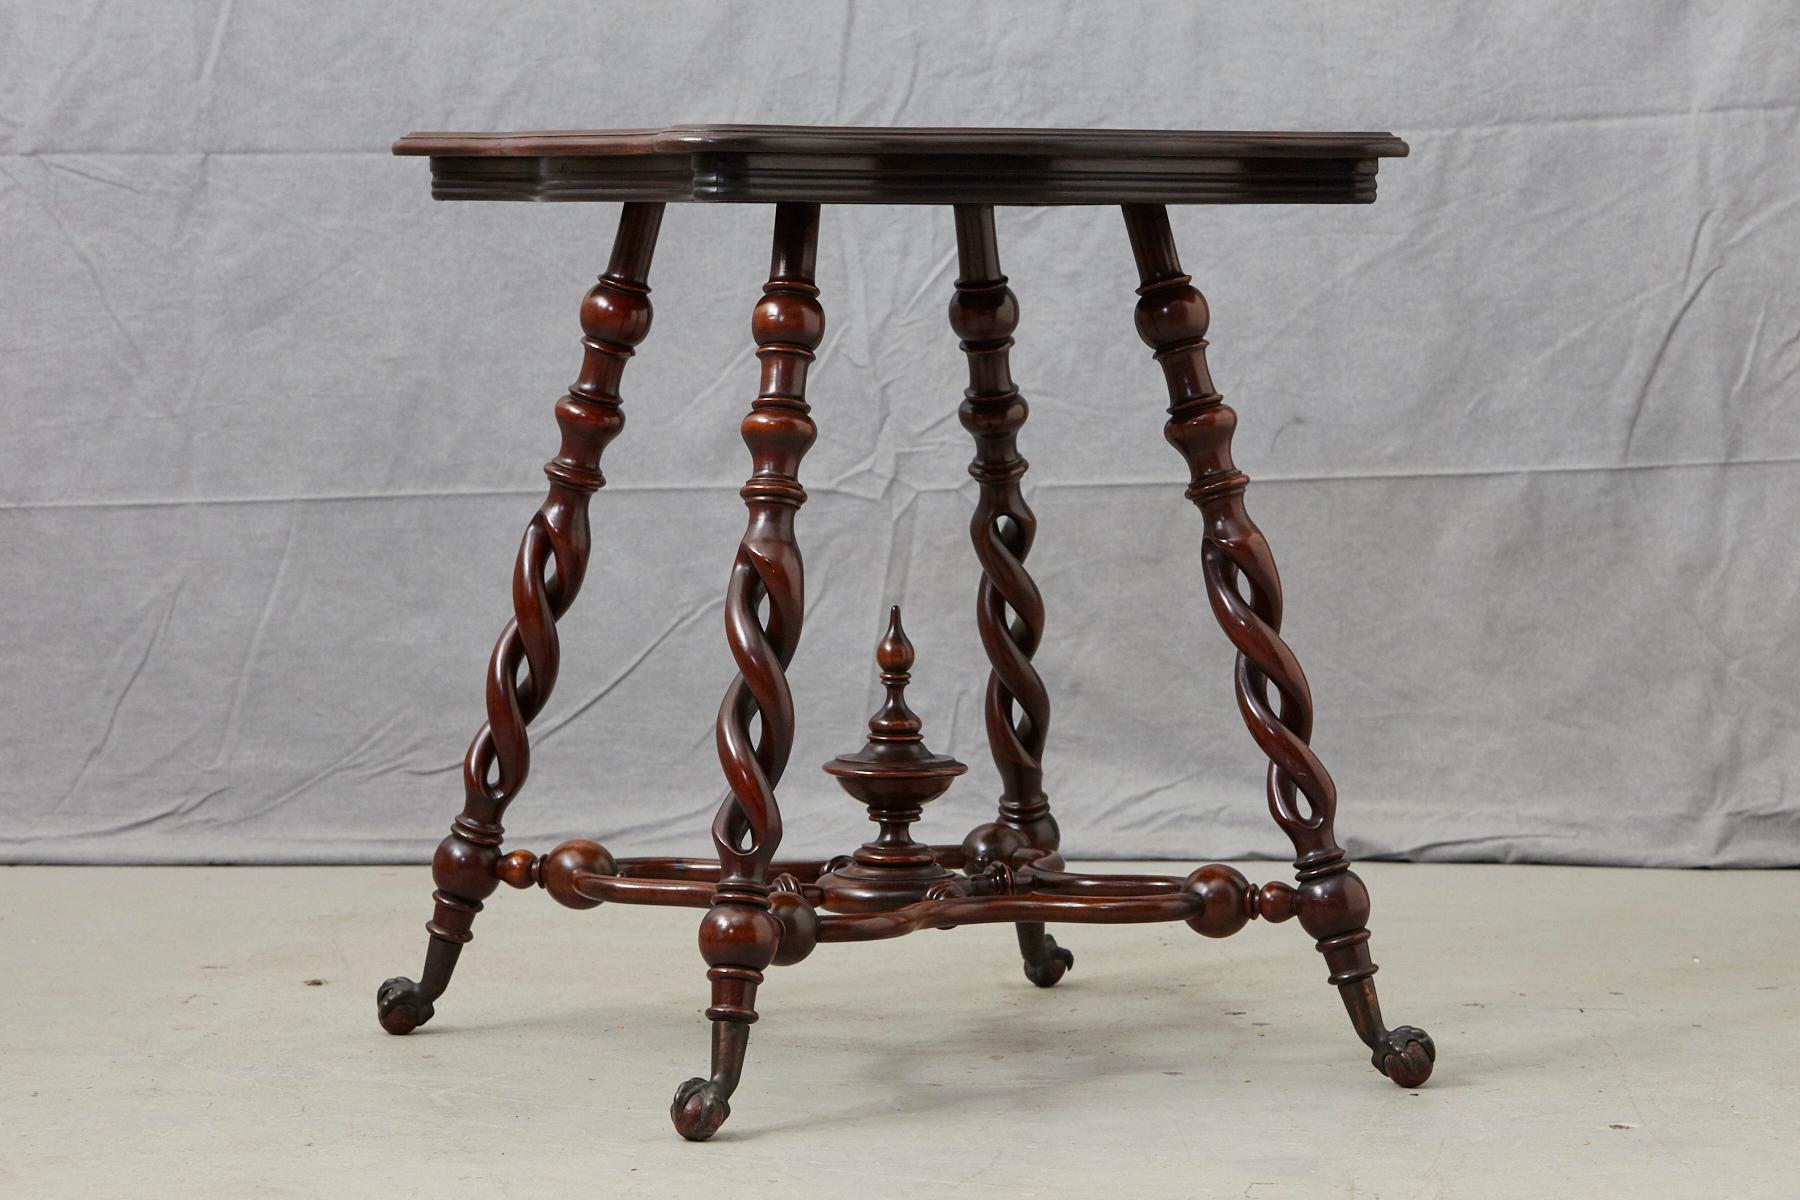 19th century French Louis XIII style square walnut side table raised on four exquisite barley twist legs. Detailed, carved stretchers with urn-shaped carved finial and brass ball and claw feet.
  